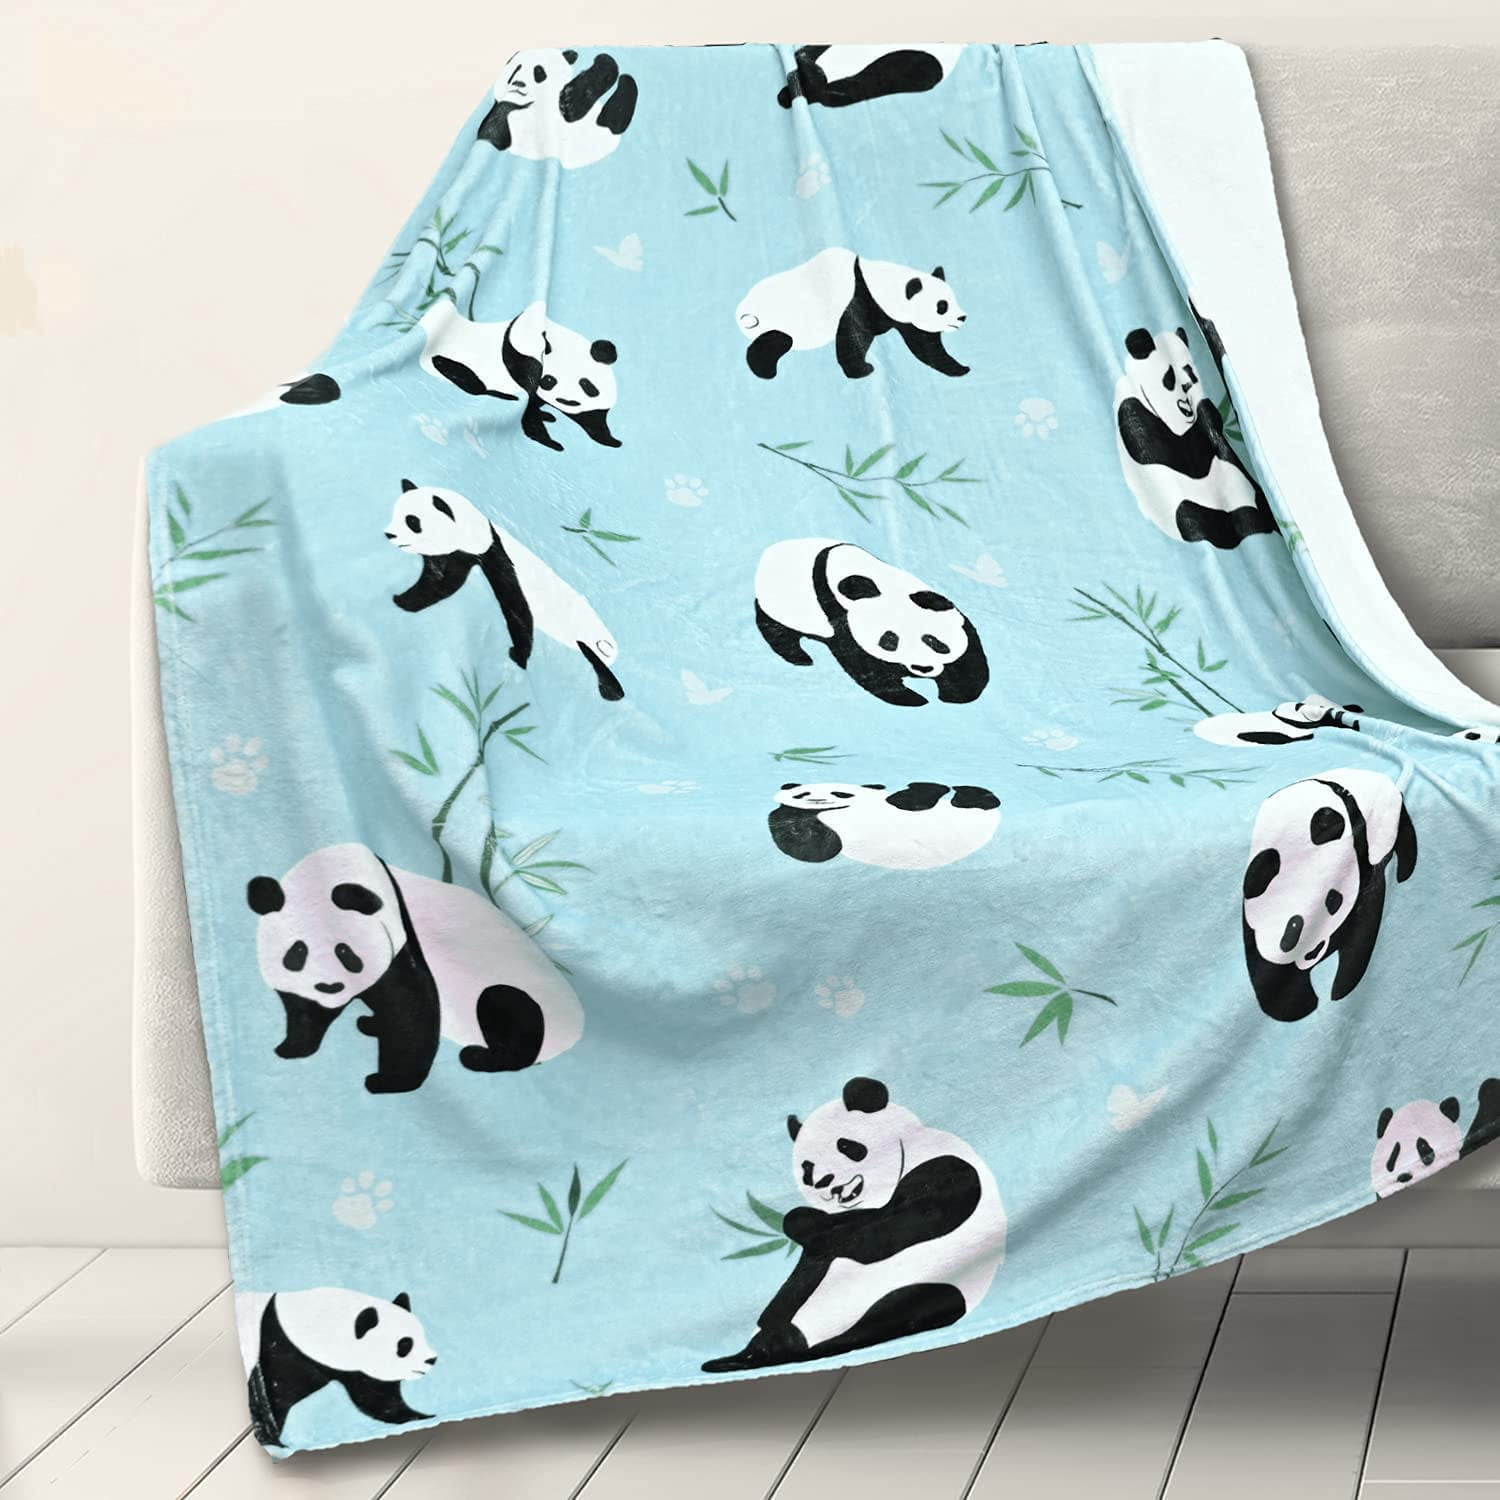 Details about   Cute animal print Gift for Kids boy girl Adults fleece plush Throw Blanket 